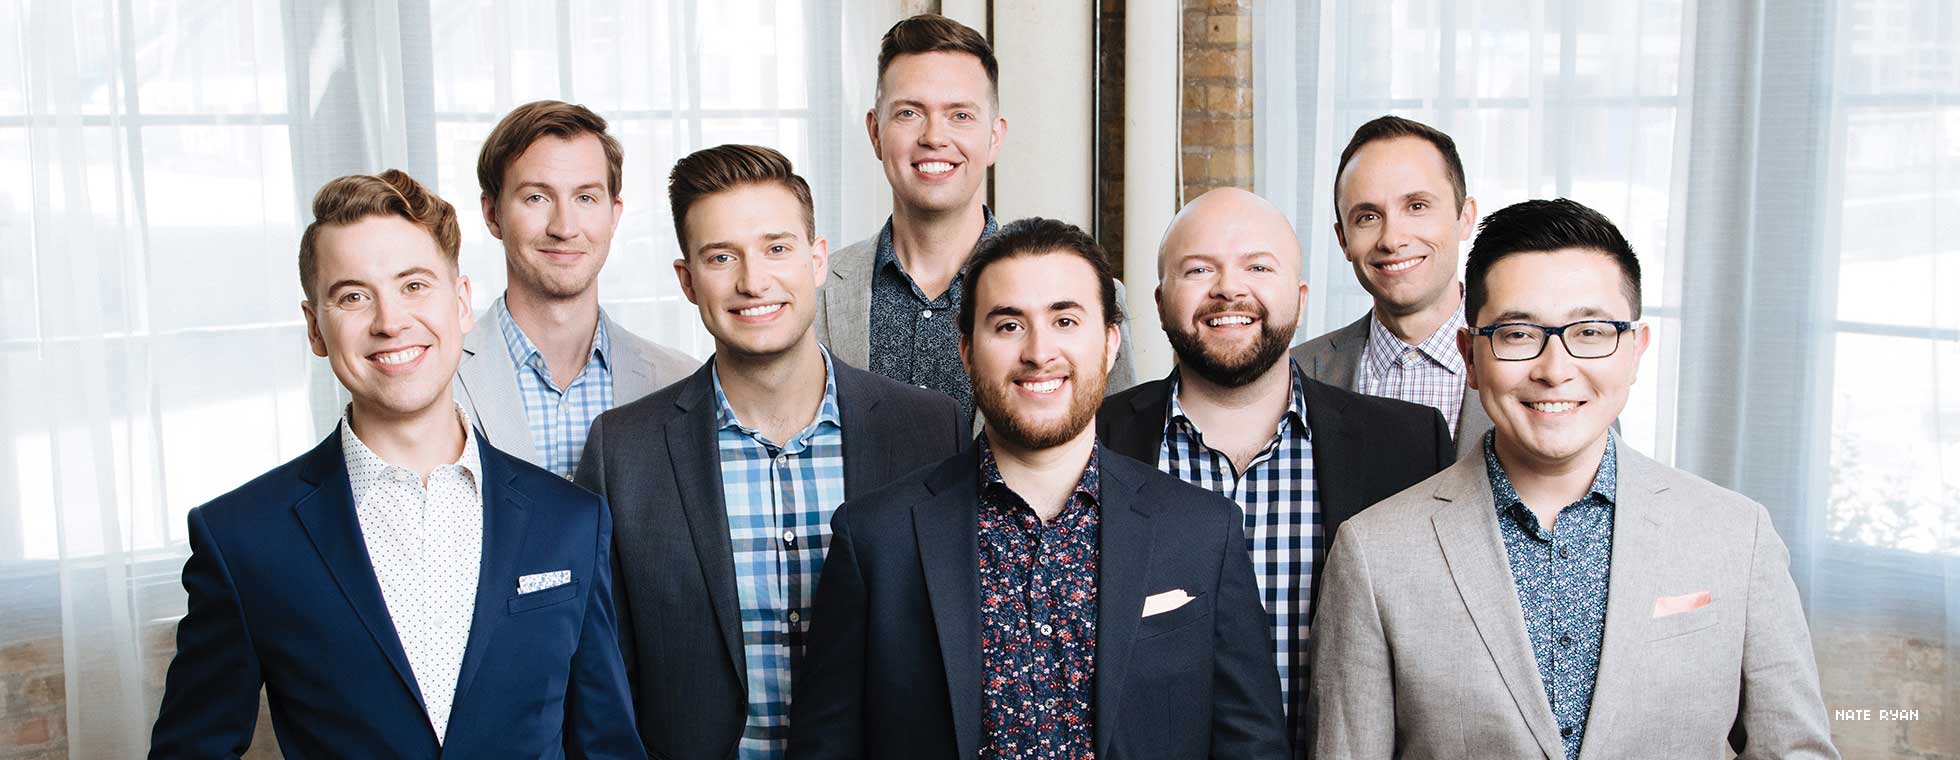 The eight members of Cantus stand together wearing casual suit jackets while smiling for the camera.